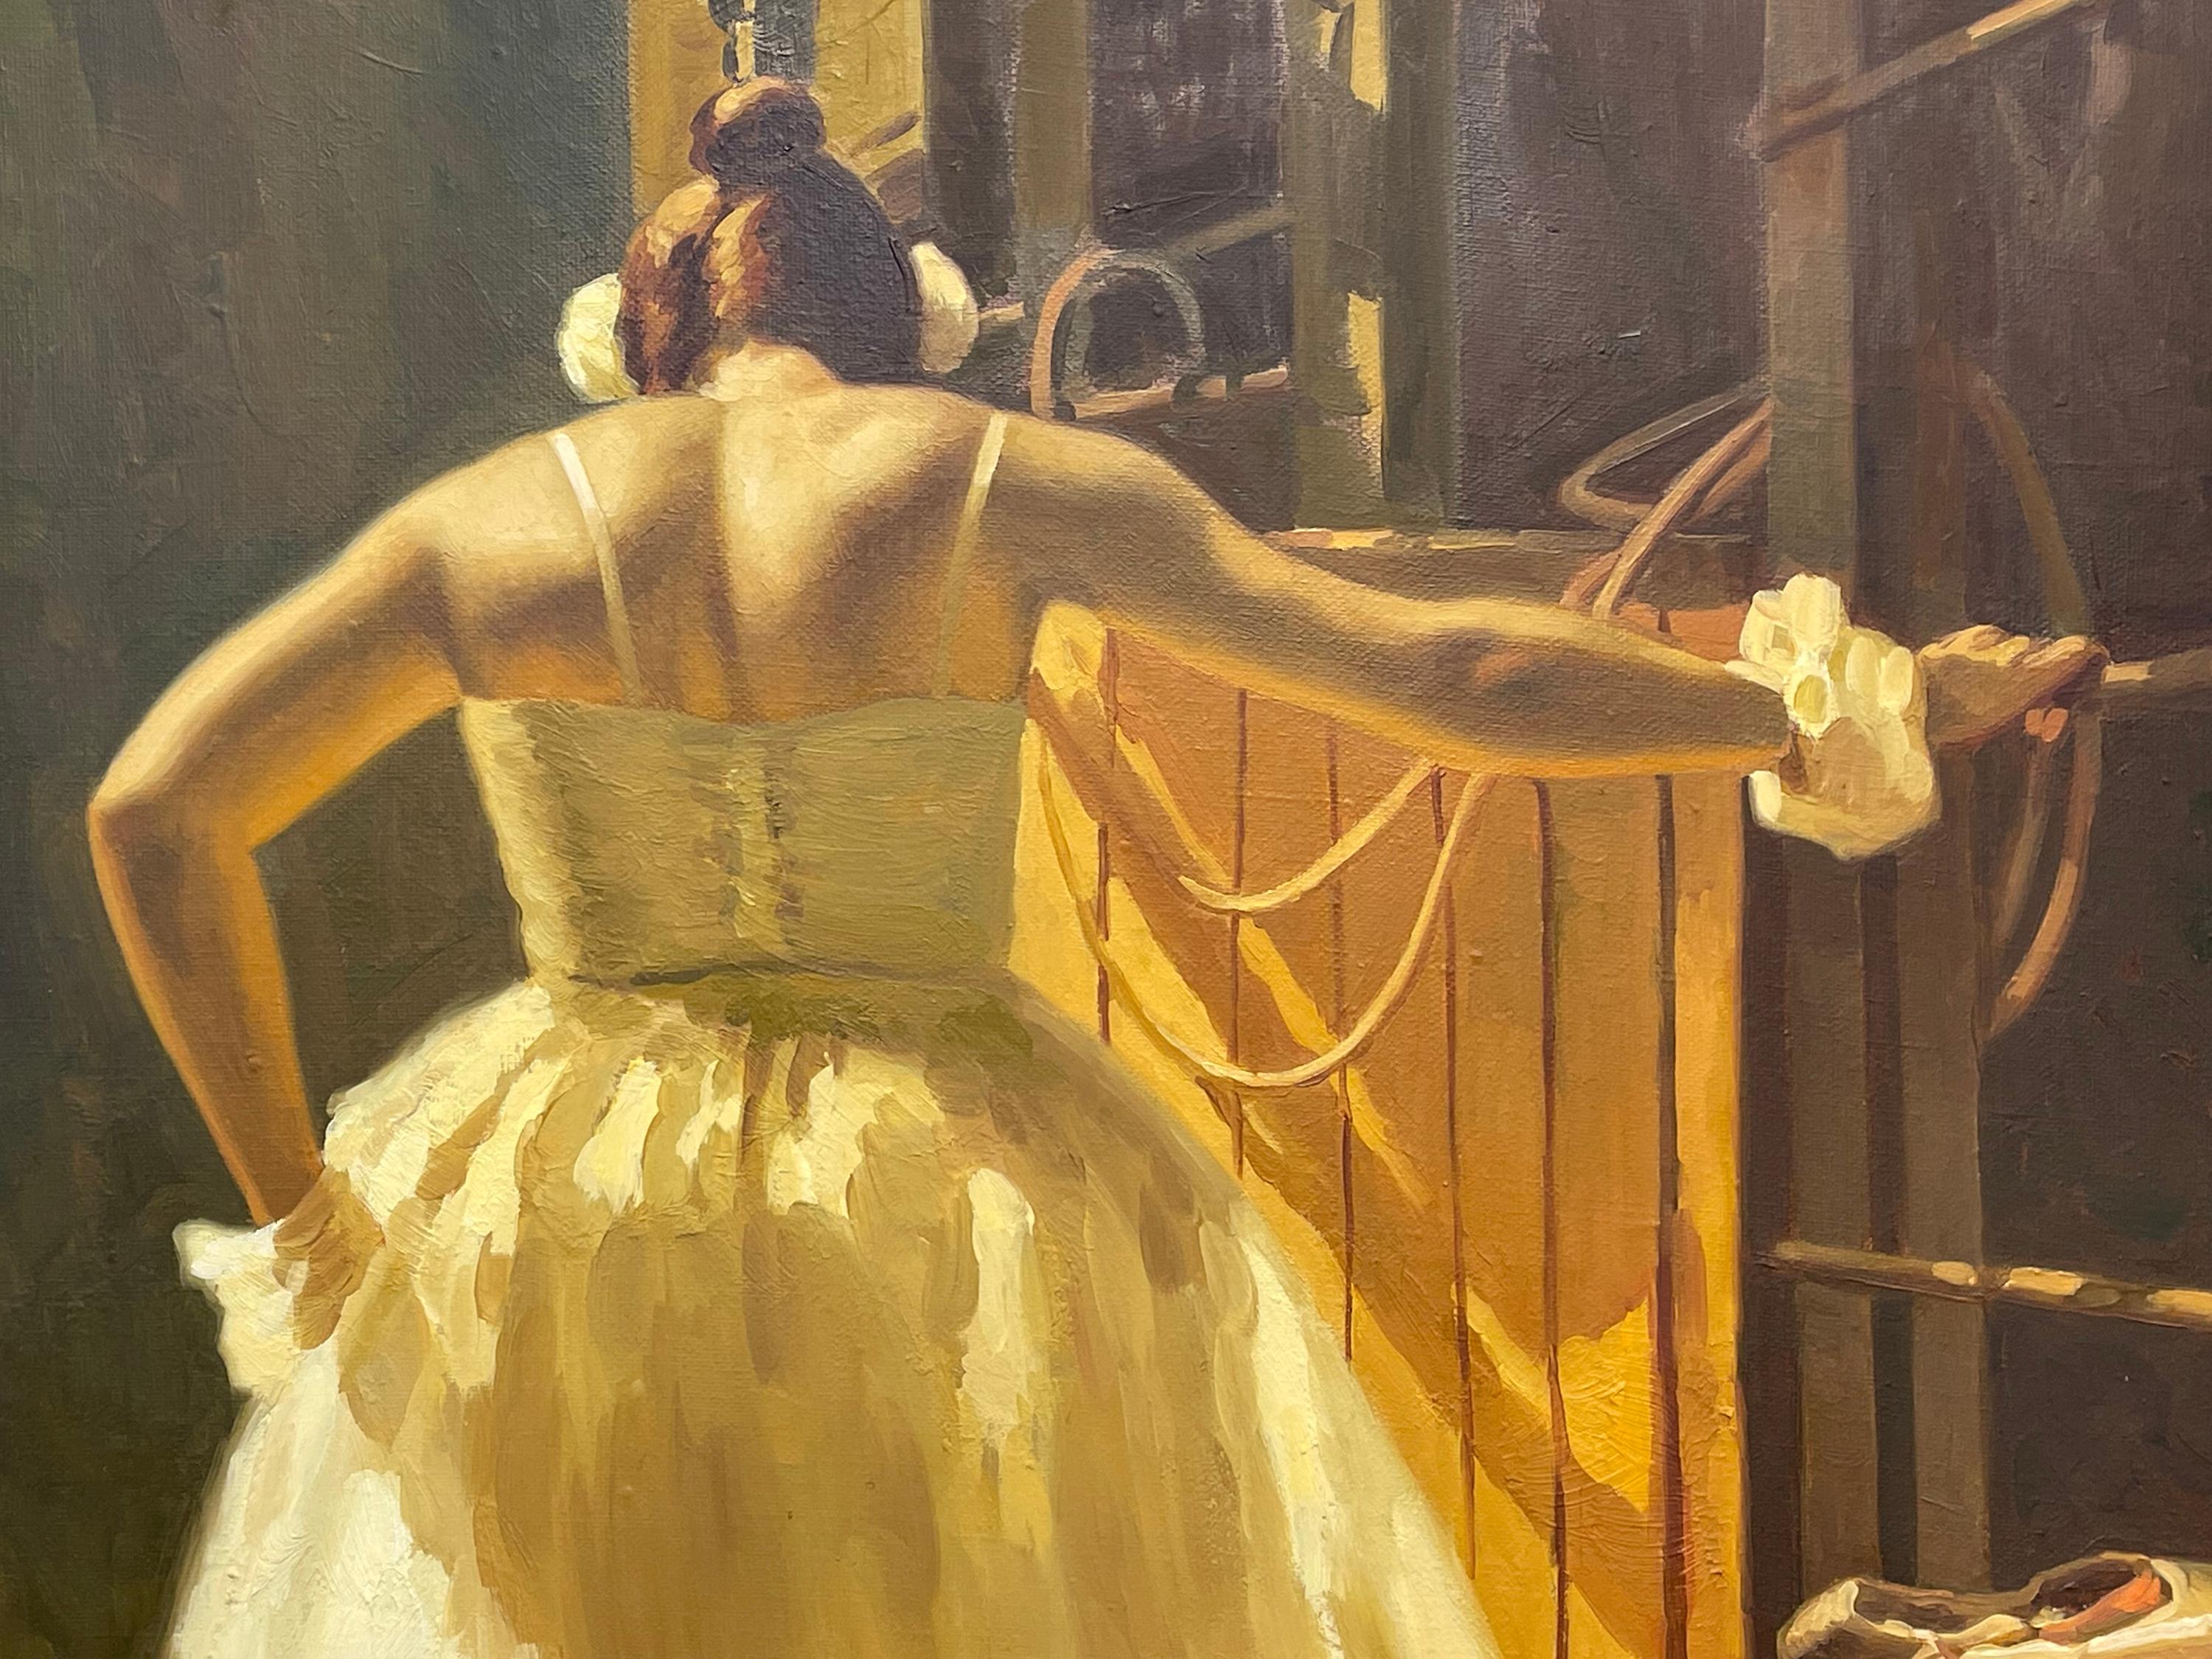 BACKSTAGE - Painting by Yevgeny Balakshin